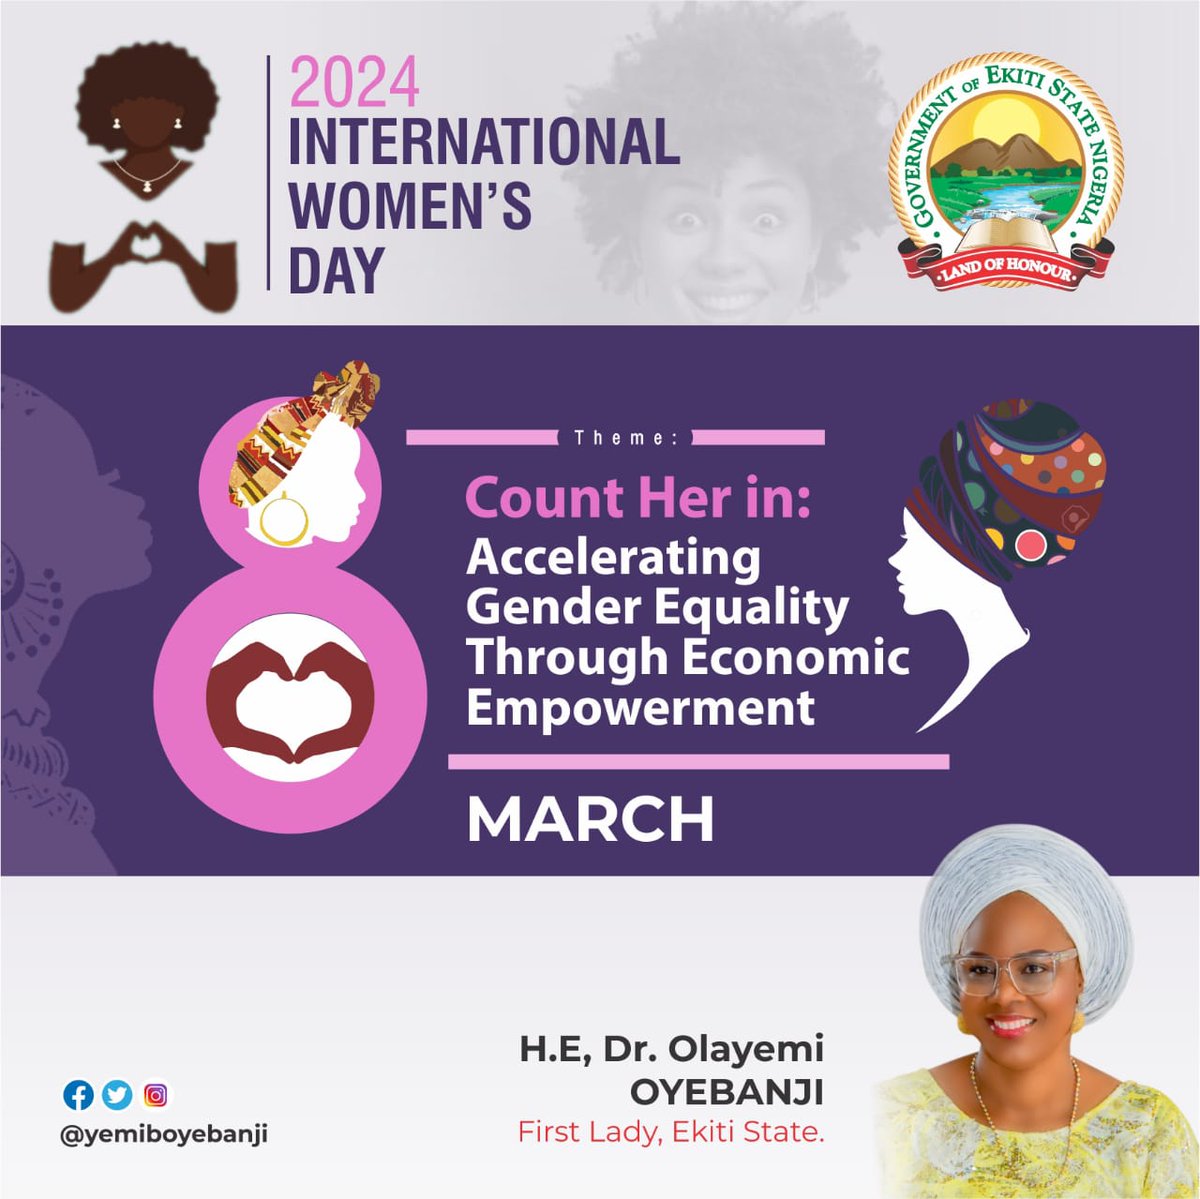 International Women's Day 2024: Count Her In – Accelerating Gender Equality Through Economic Empowerment. Economic empowerment fuels equality. Let's amplify women's voices, nurture their potentials, and advance gender equality. Together, let's empower women economically and…